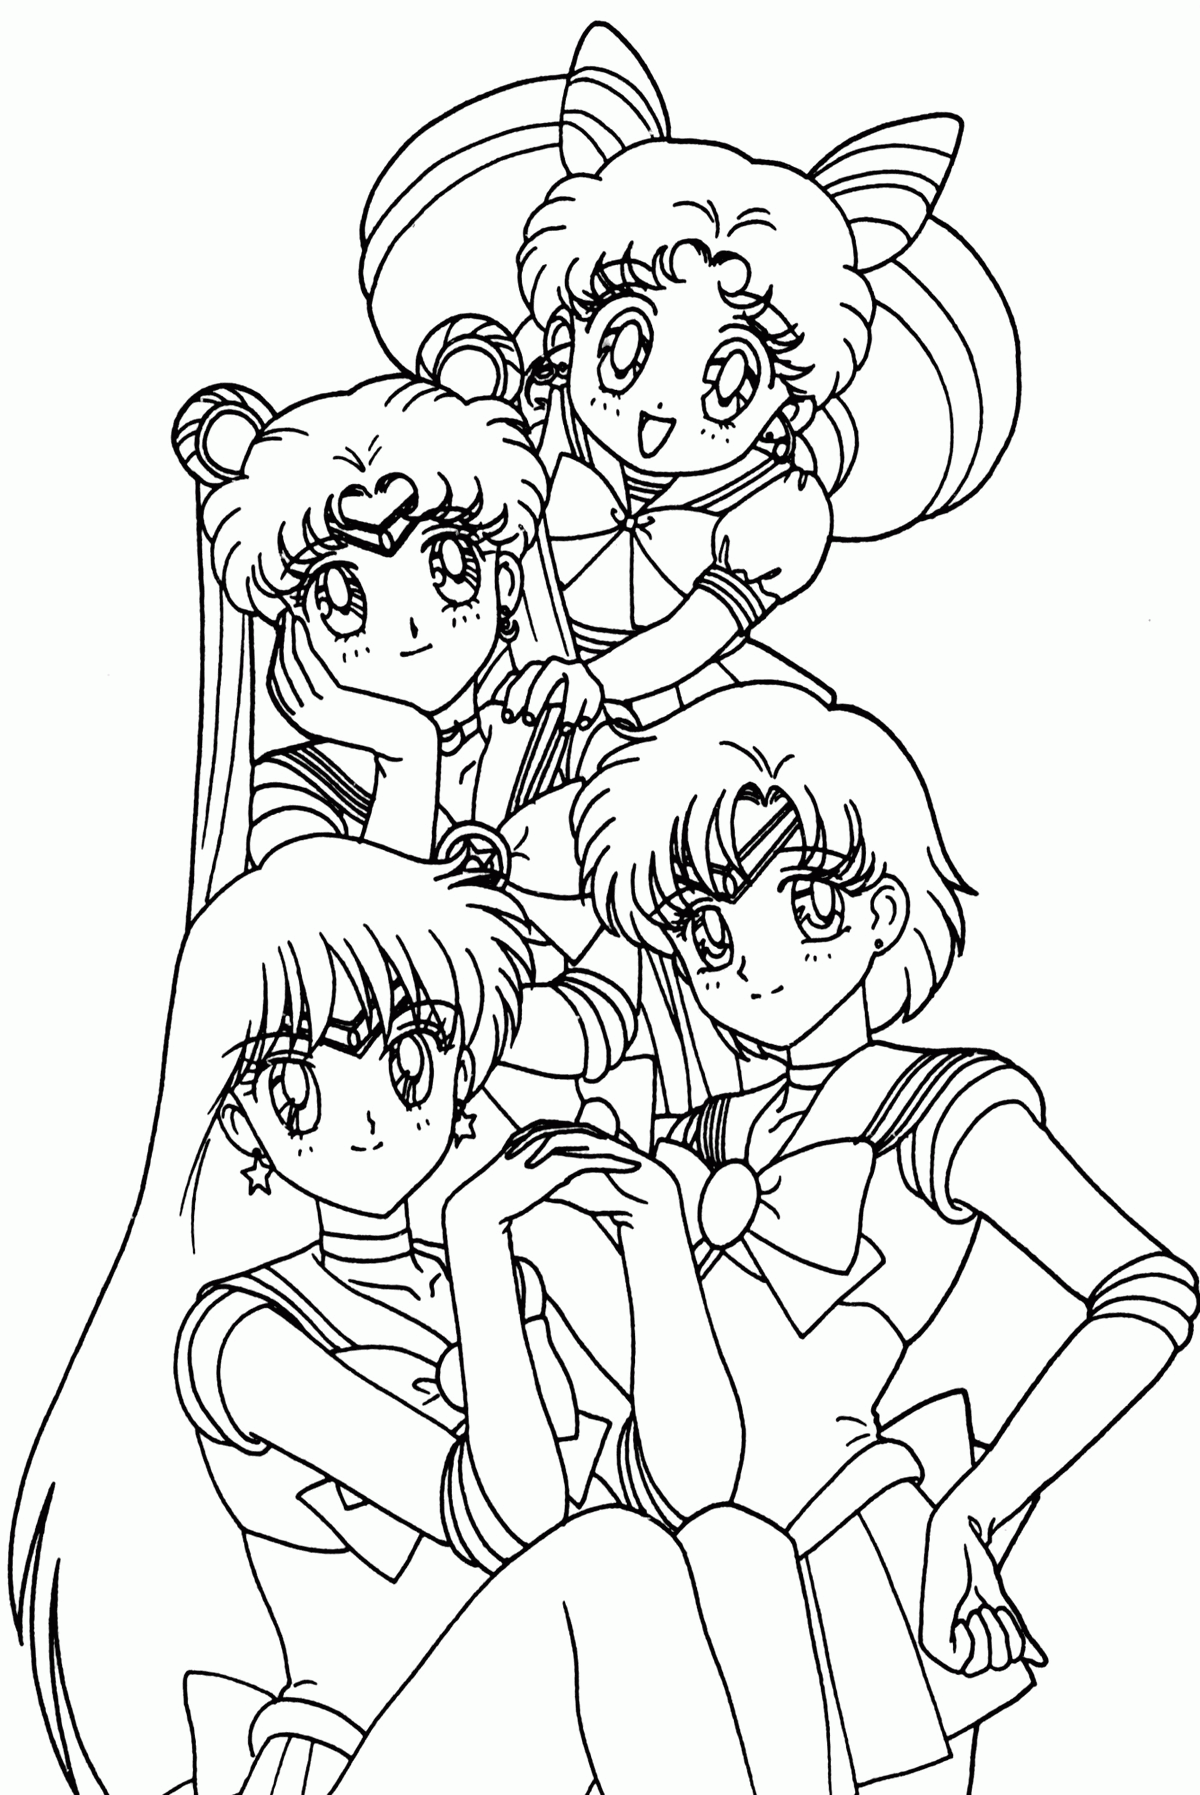 9 Pics Of Anime Group Coloring Pages - Anime Girls Coloring Pages